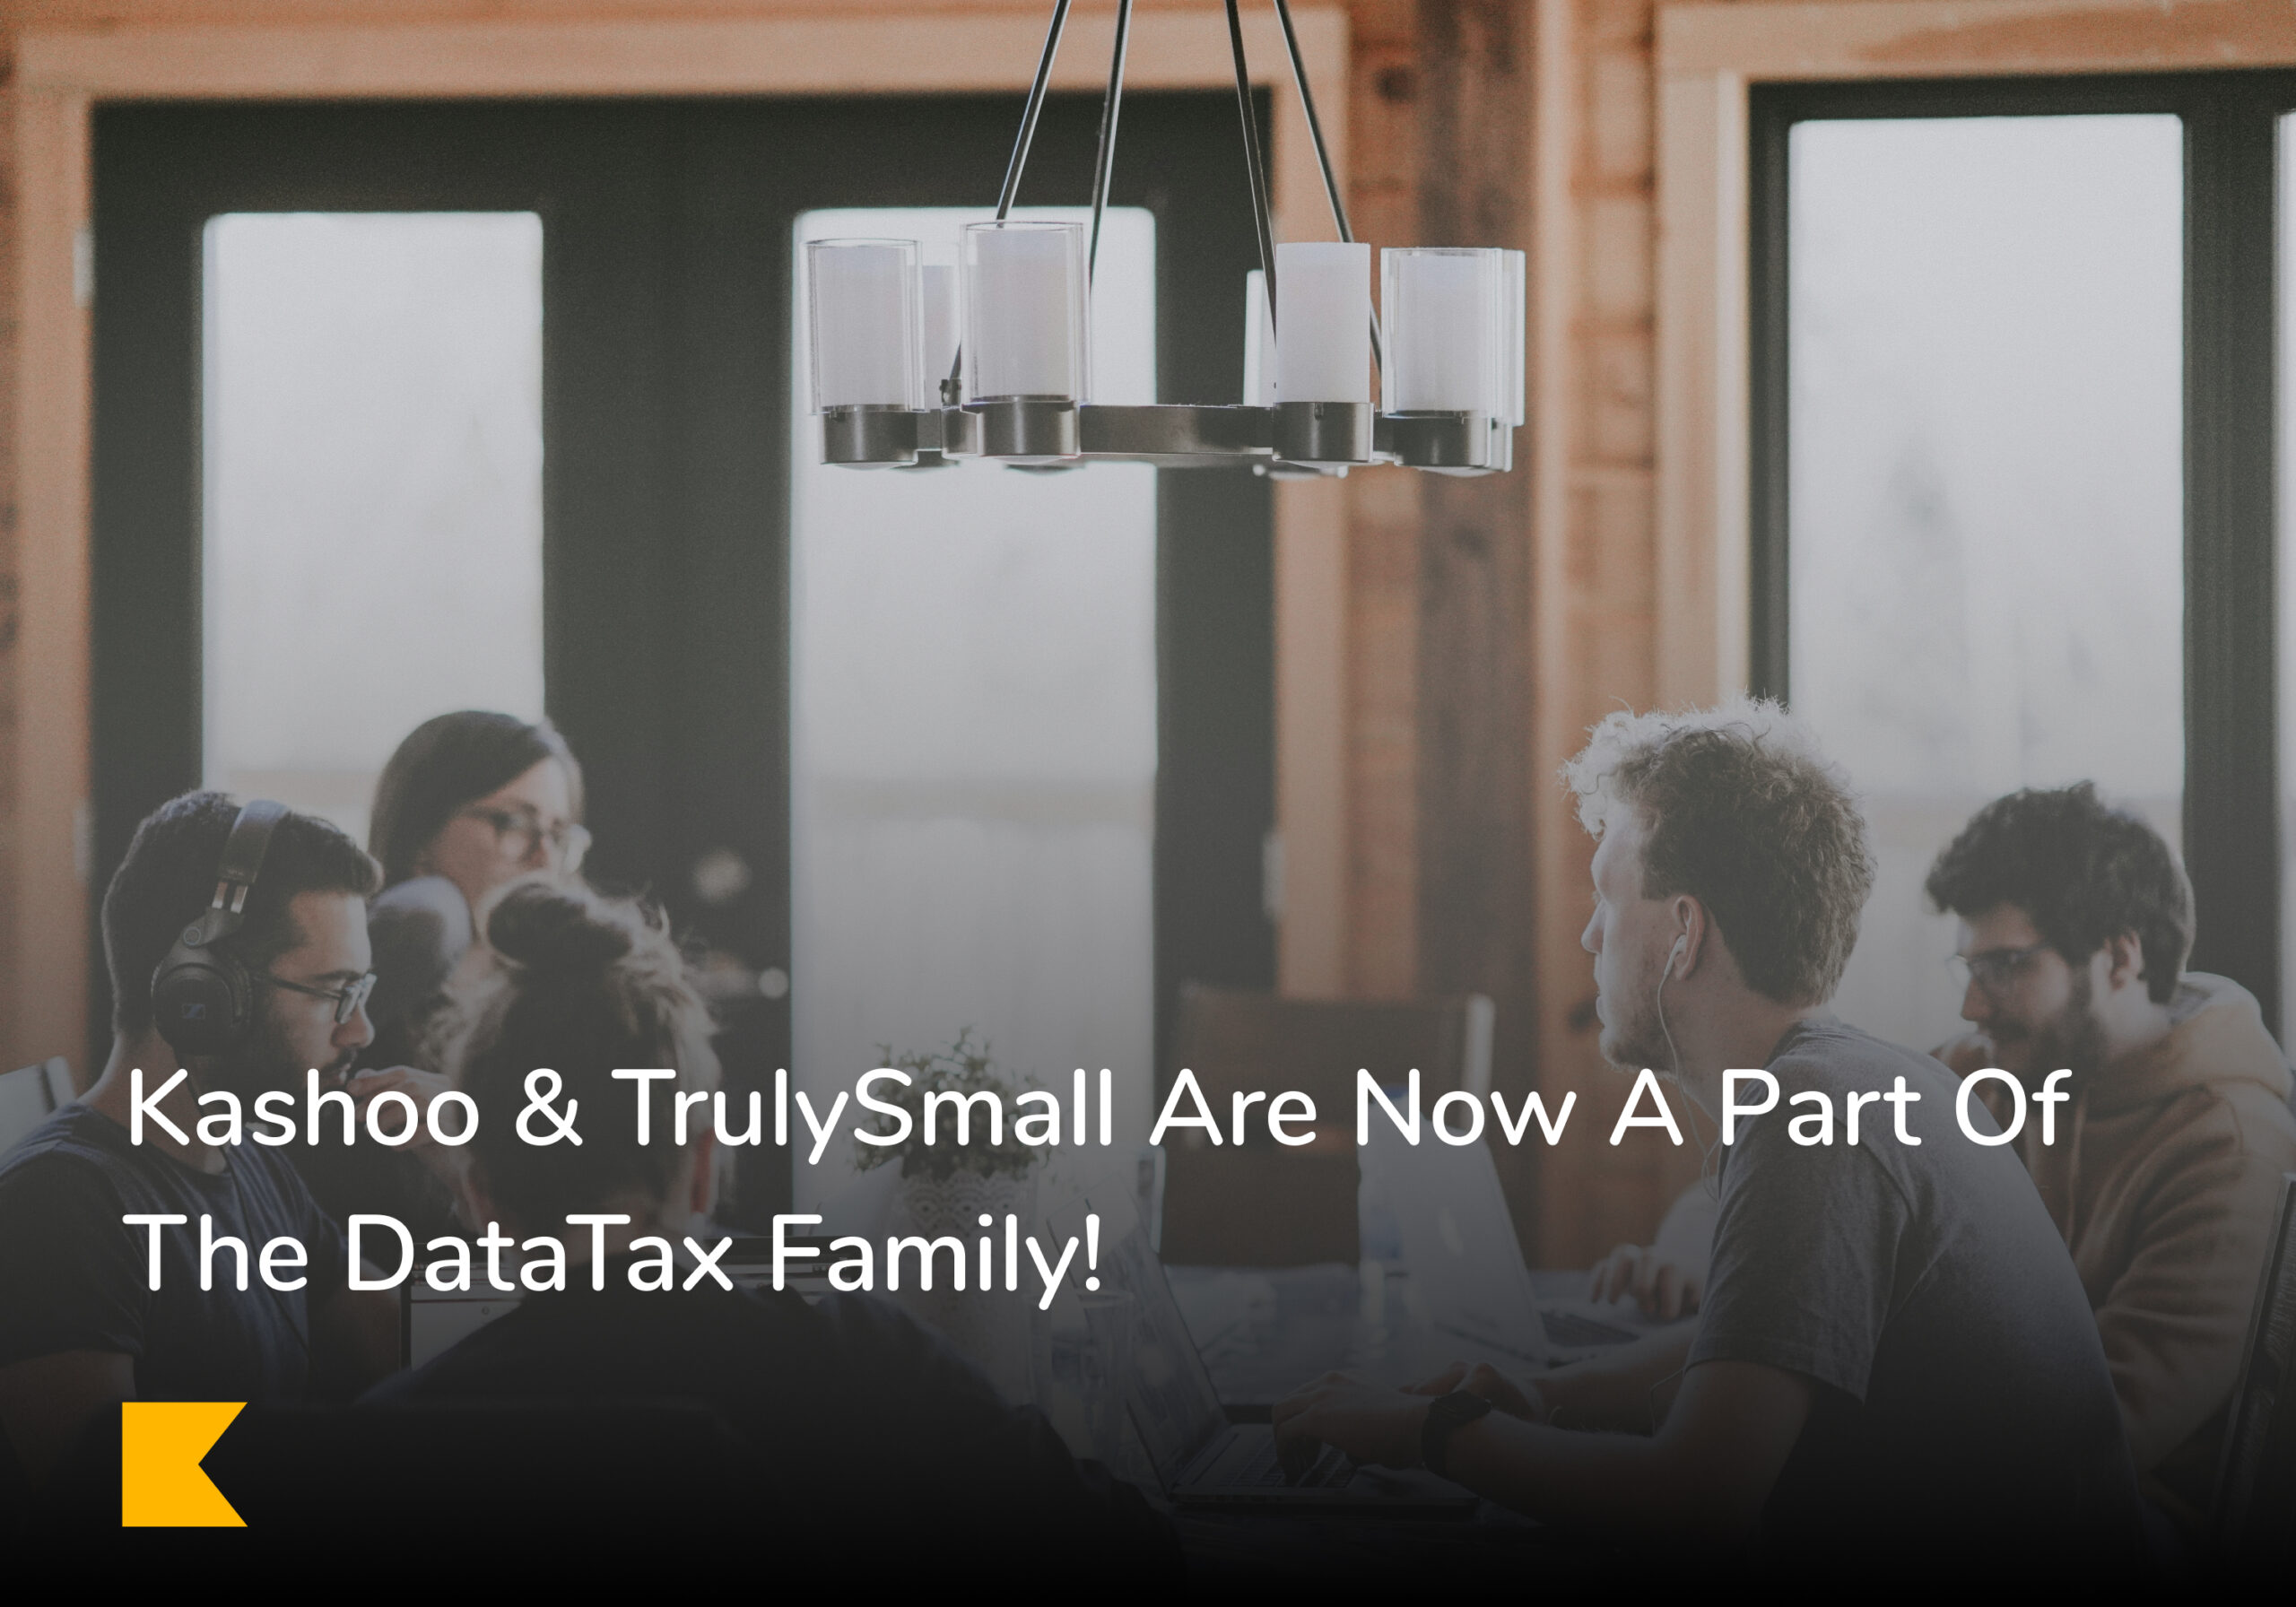 Kashoo & TrulySmall Are Now Apart of The DataTax Family!